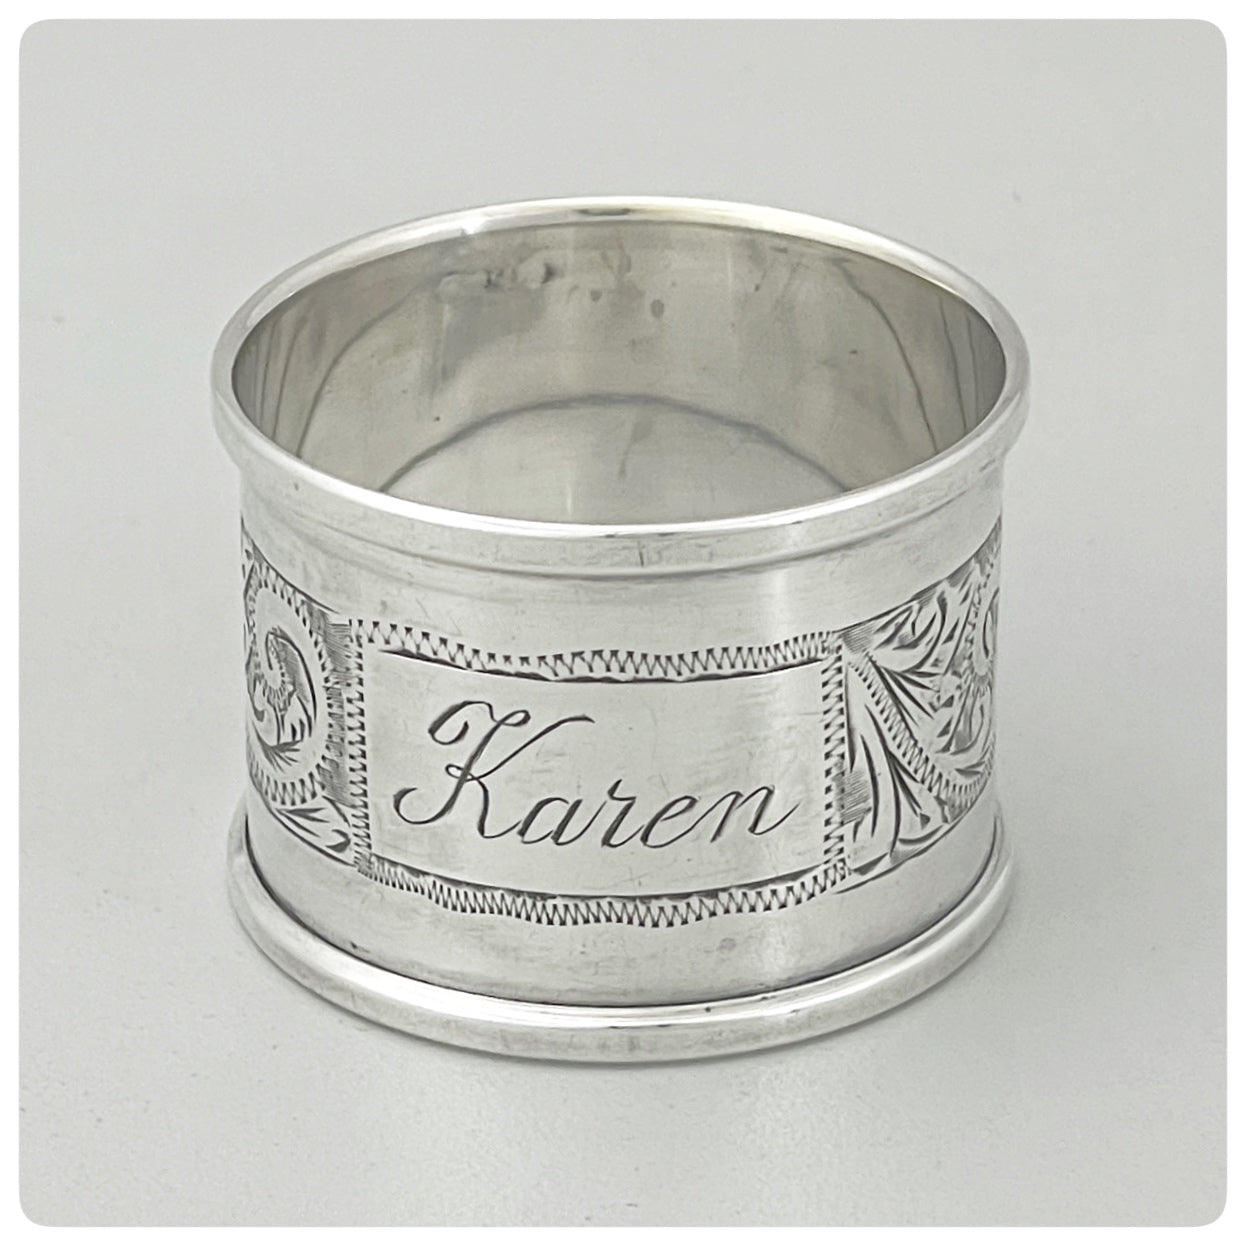 English Sterling Silver Napkin Ring, Henry Griffith and Son, Limited, Sheffield, 1975 - The Silver Vault of Charleston